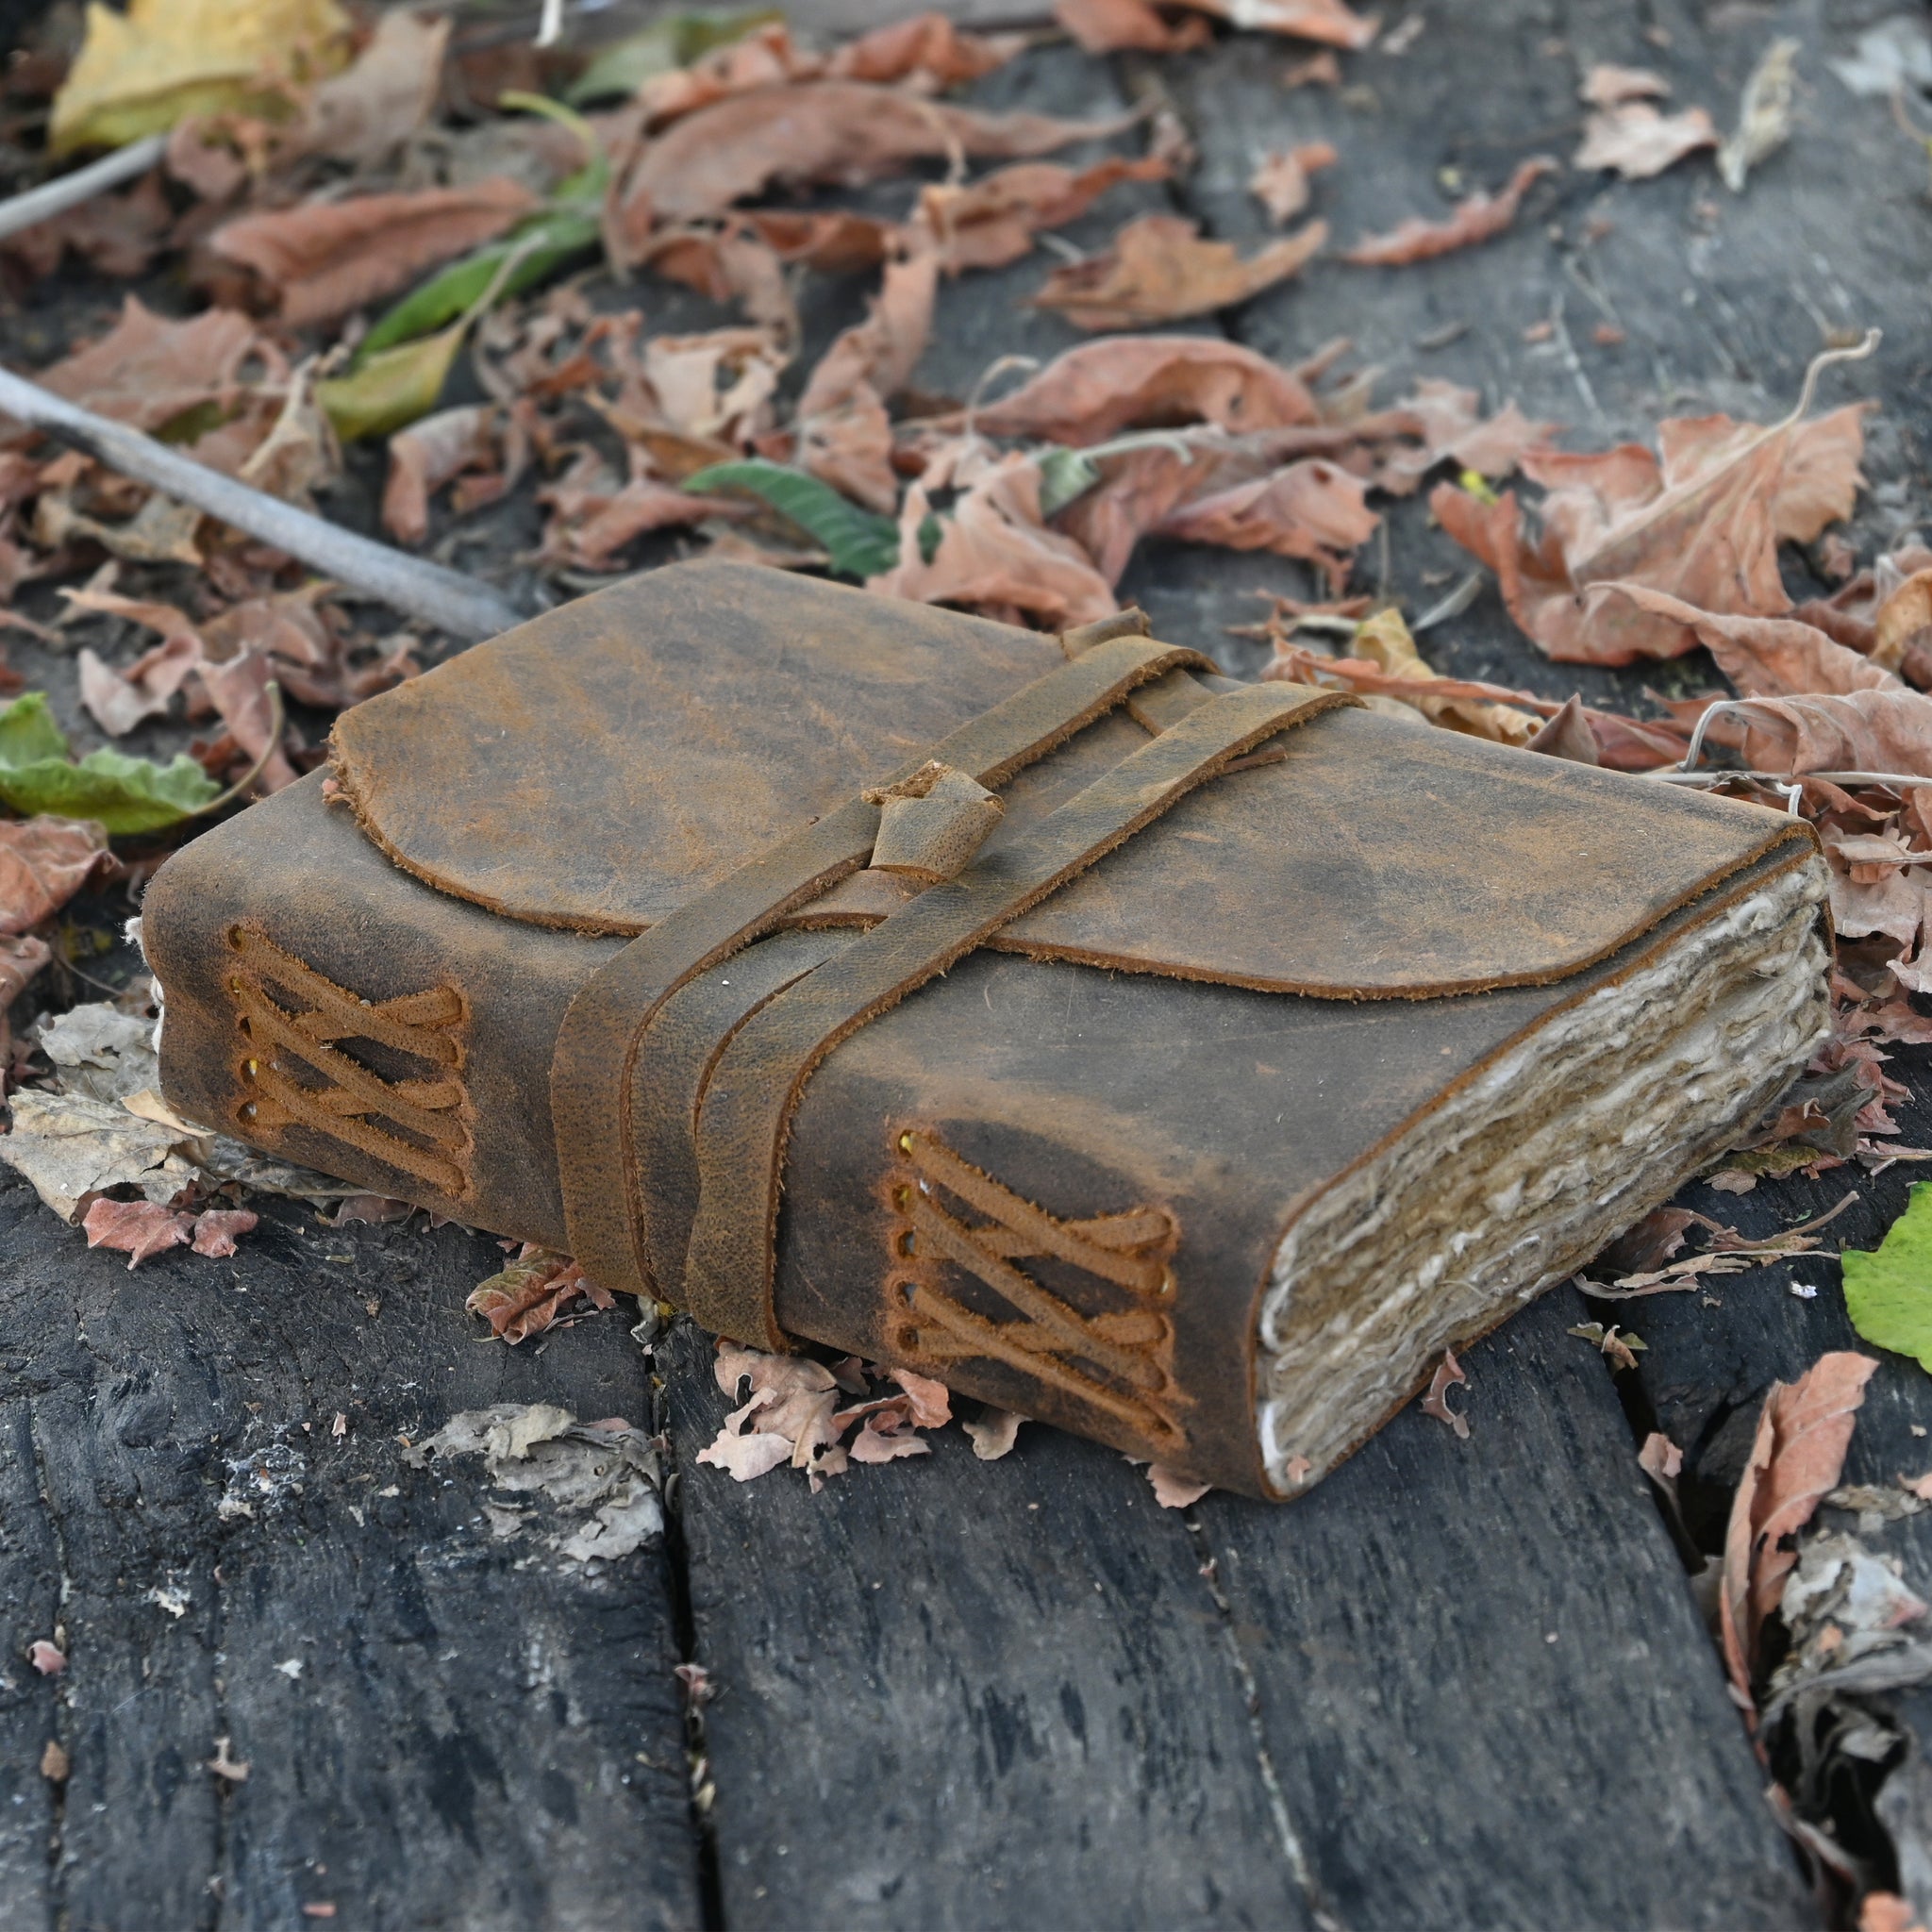 Rustic Wrap Journal - Natural Edge Leather Notebook Cover